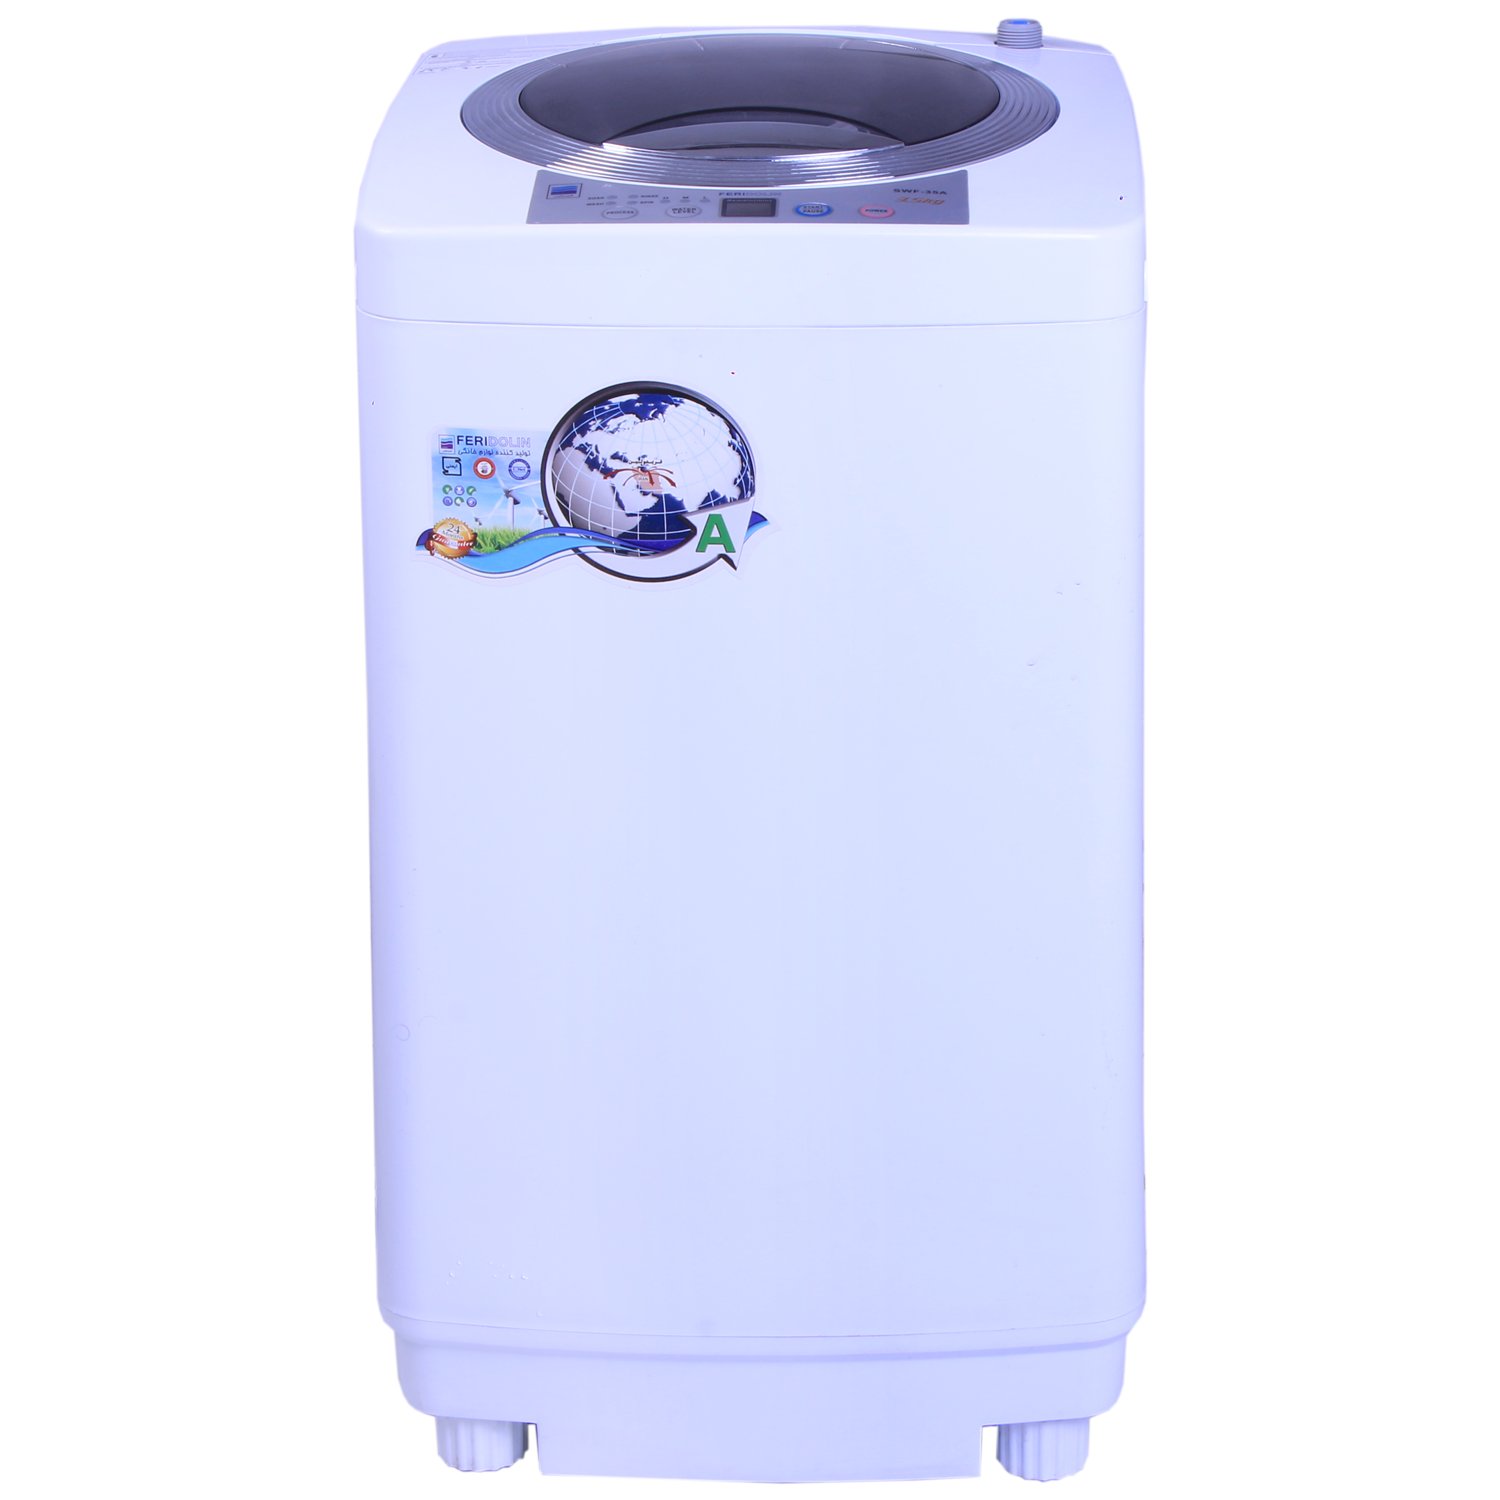 Full-automatic washing machine with 3.5 kg